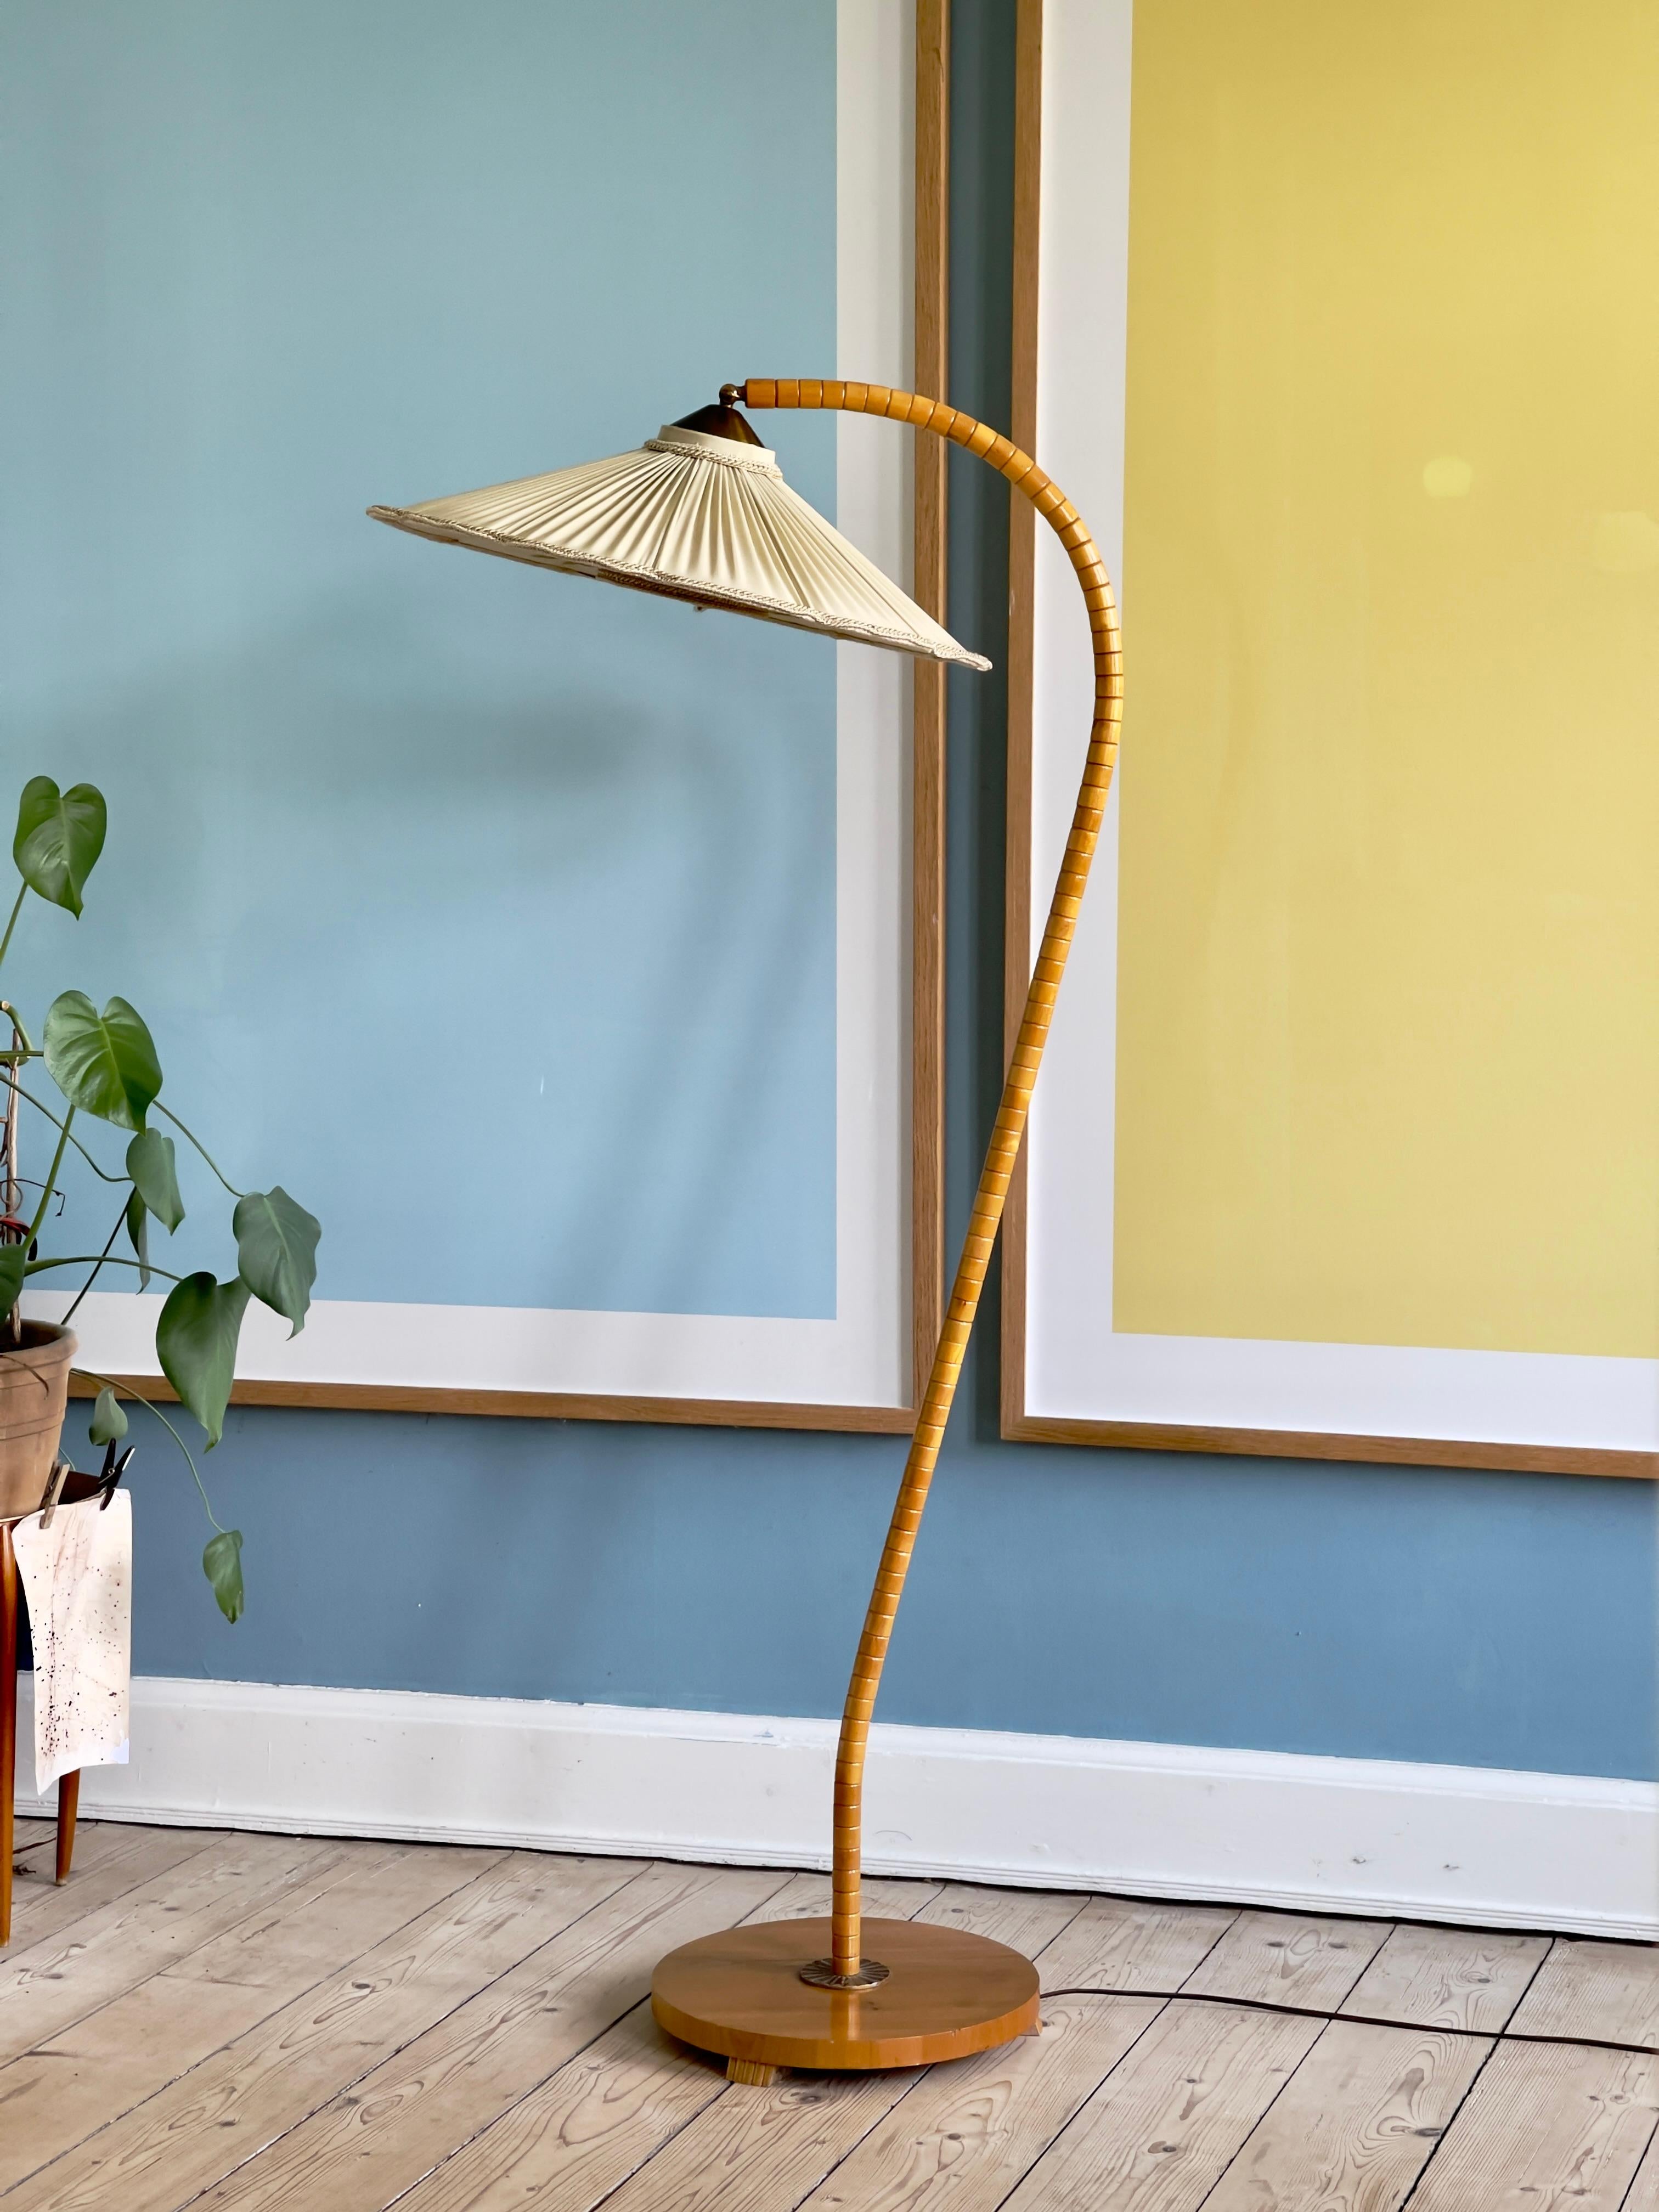 Rare original 1940s swedish modern floor lamp in solid golden patinated elm tree with beautiful hand painted bird motive on the linen fabric shade. The shade is mounted with delicate brass fixture. Attributed to modernist pioneer Josef Frank. Very